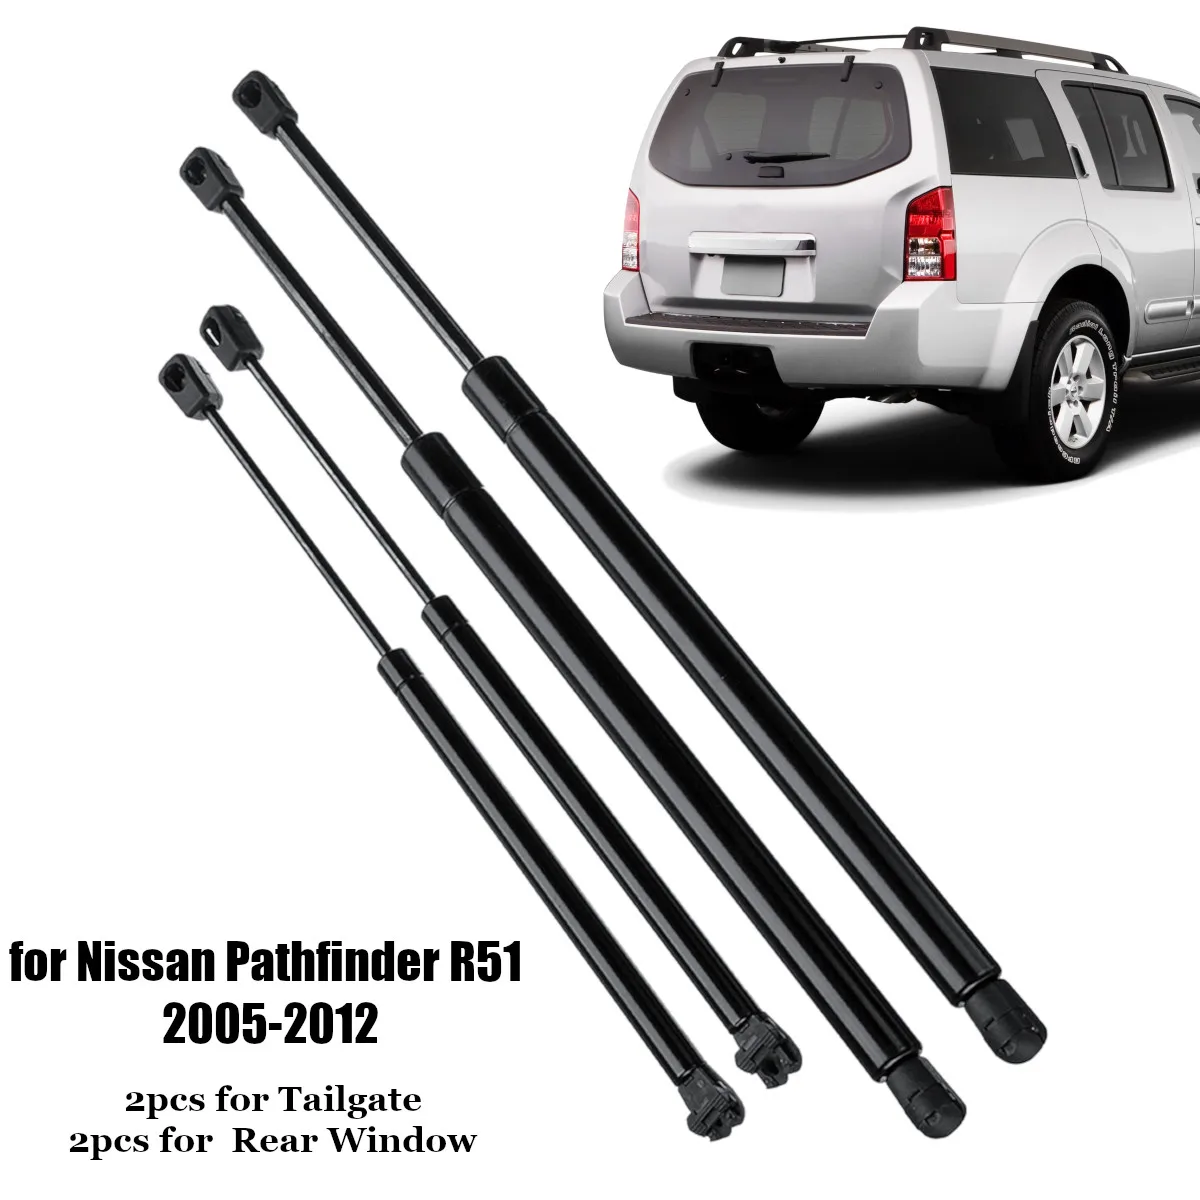 

4X Rear Window Tailgate Boot Gas Spring Struts Strut Support Rod Arm Bars For Nissan Pathfinder R51 2005 2006 2007 2008 - 2012